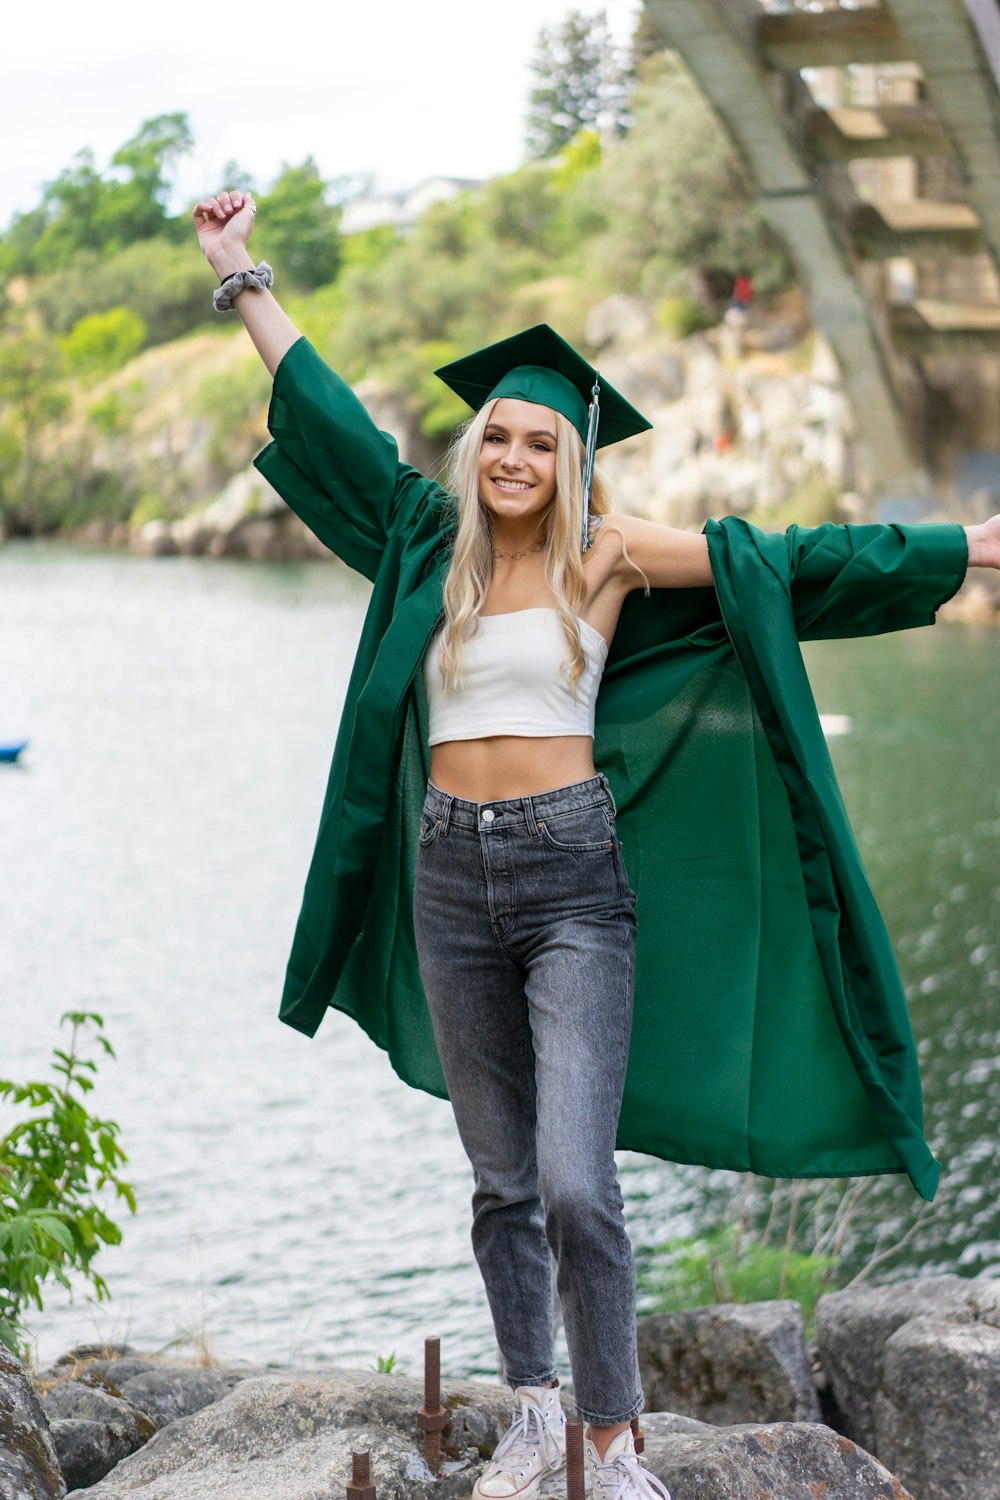 woman in green academic dress and white brassiere